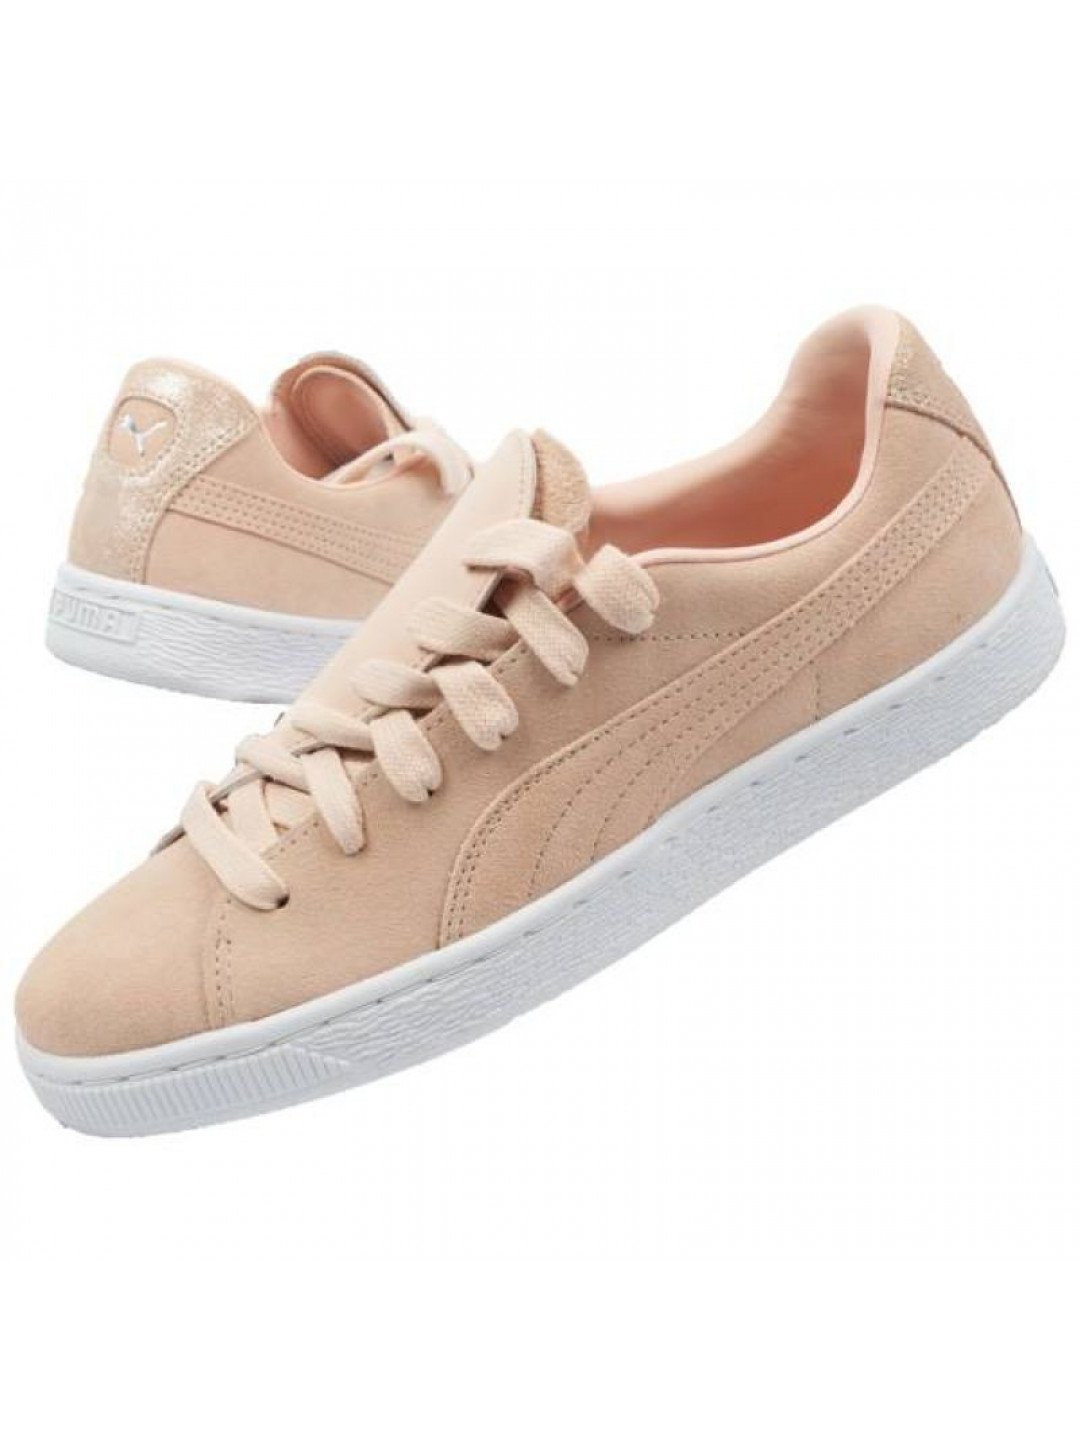 Boty Puma suede crush frosted W 370194 01 37